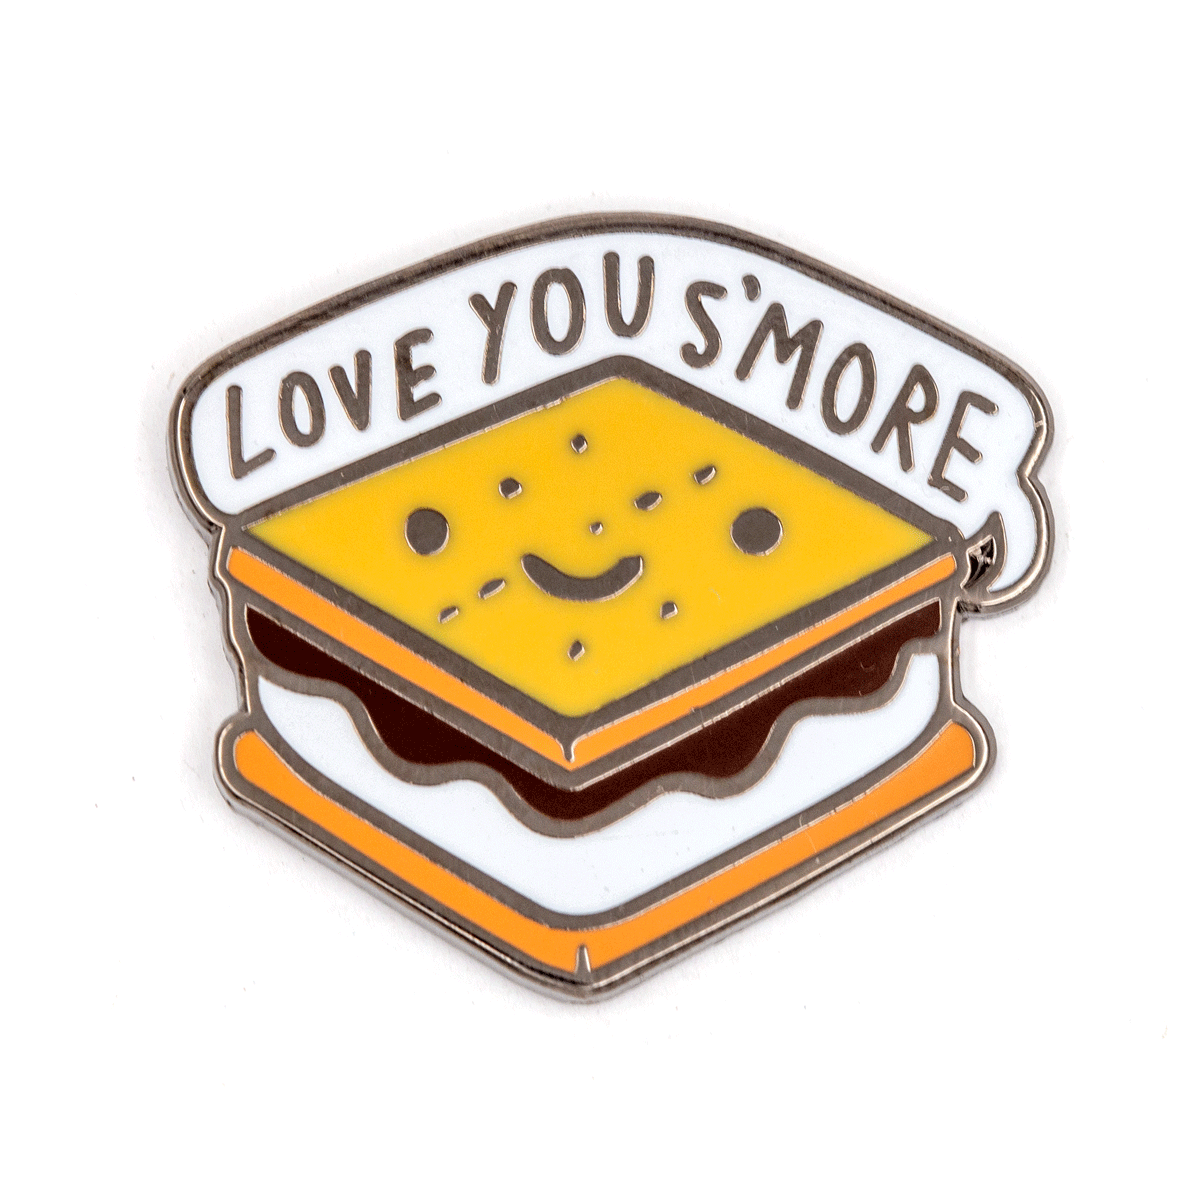 Love You S'more Pin